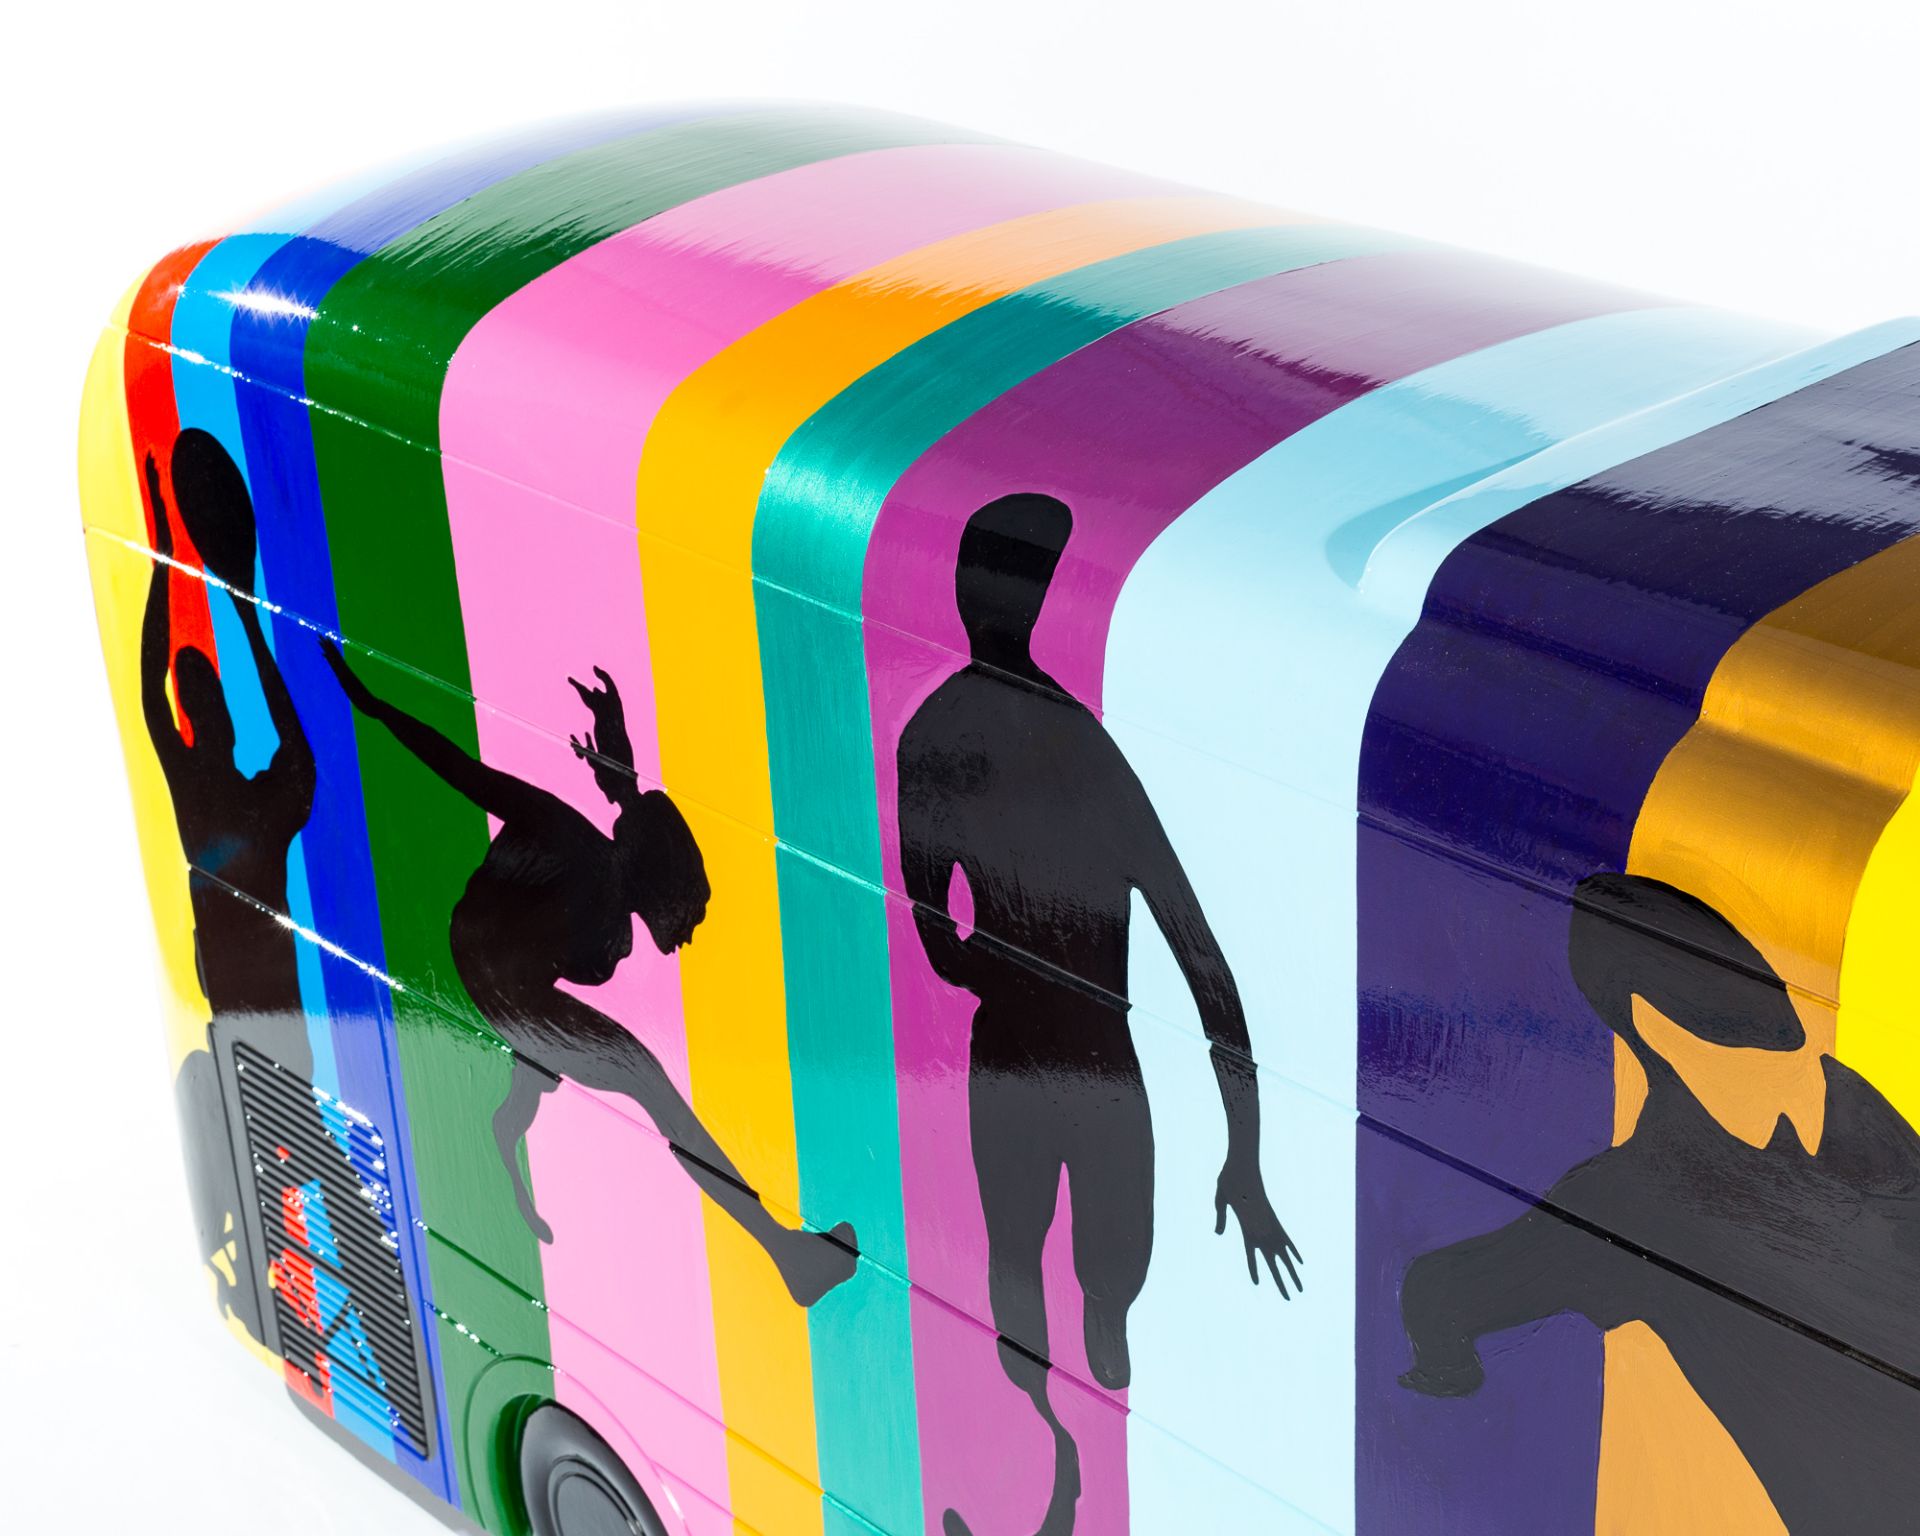 Artist: Tom Yendell  Design: The Paralympic Bus    About the artist   Colours, shapes and figures of - Image 3 of 3